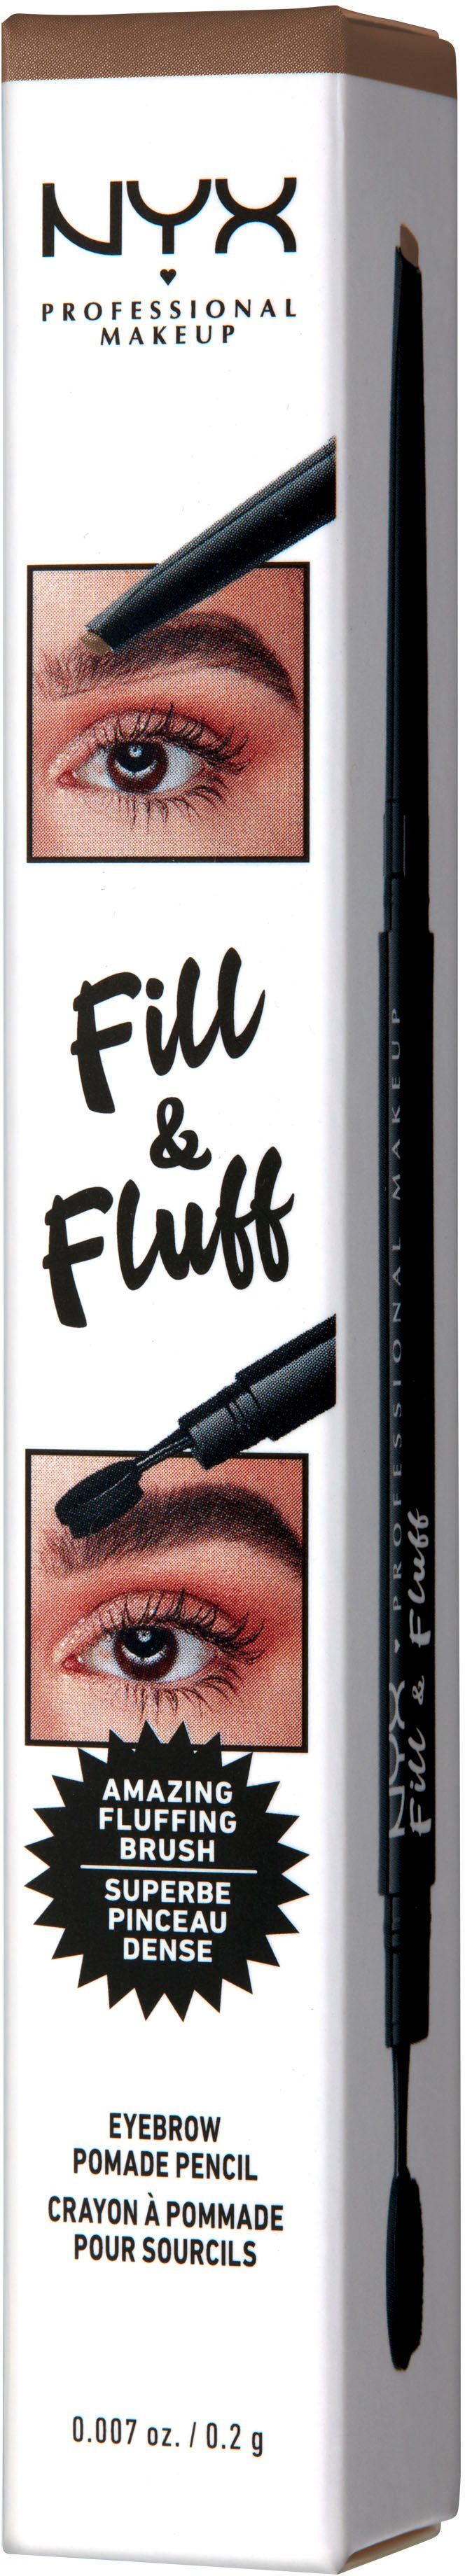 NYX Augenbrauen-Stift Professional Fluff Eyebrow taupe Pomade Fill Makeup & Pencil